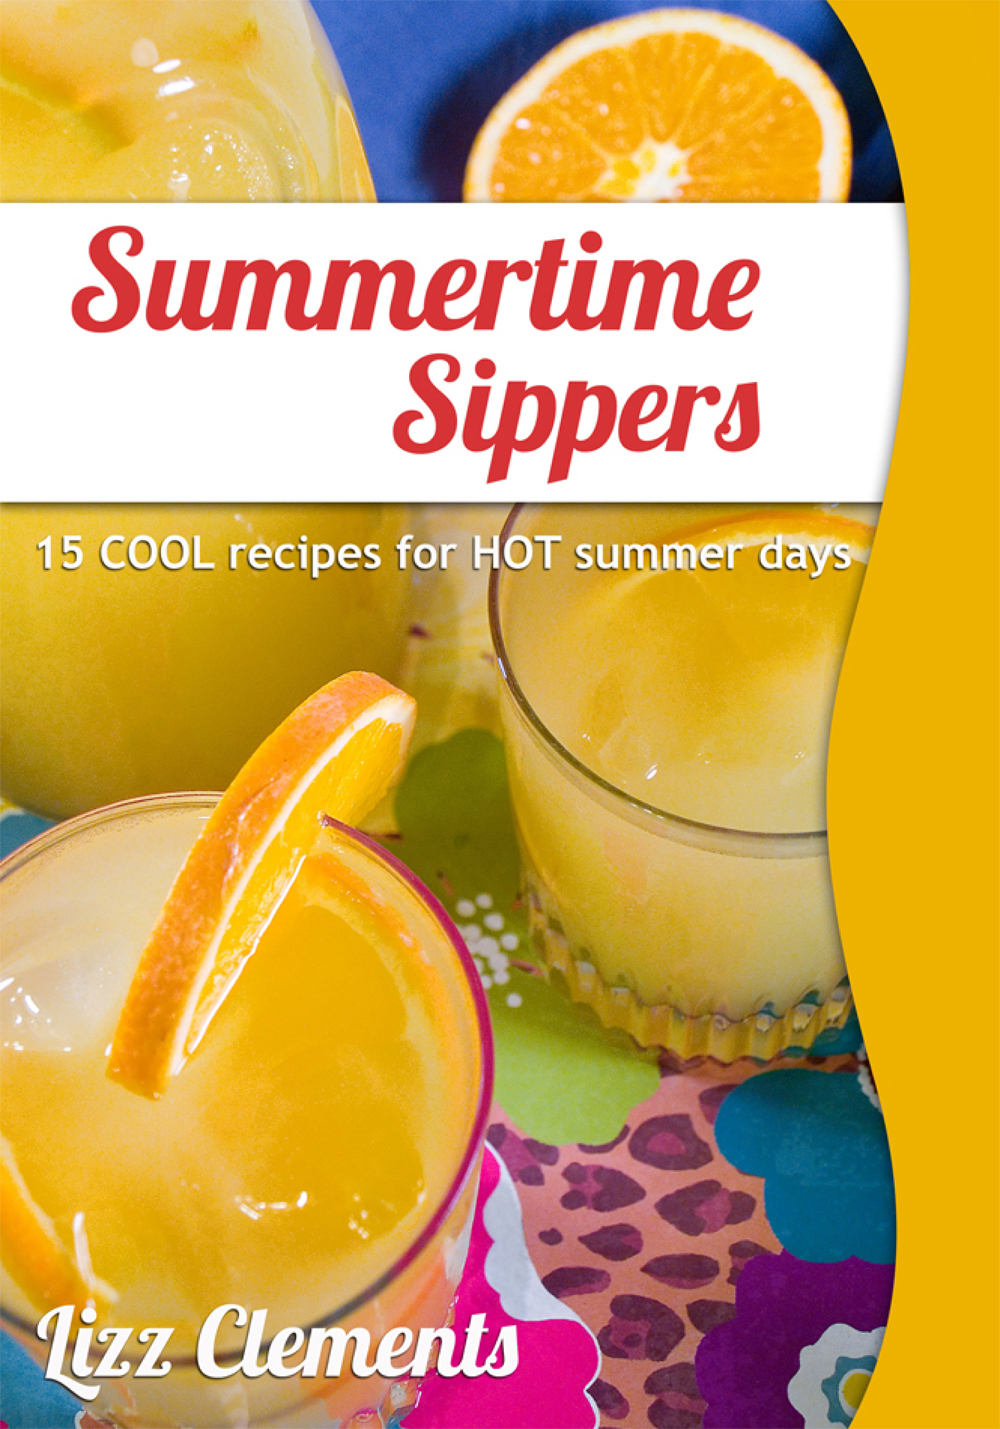 Summertime Sippers